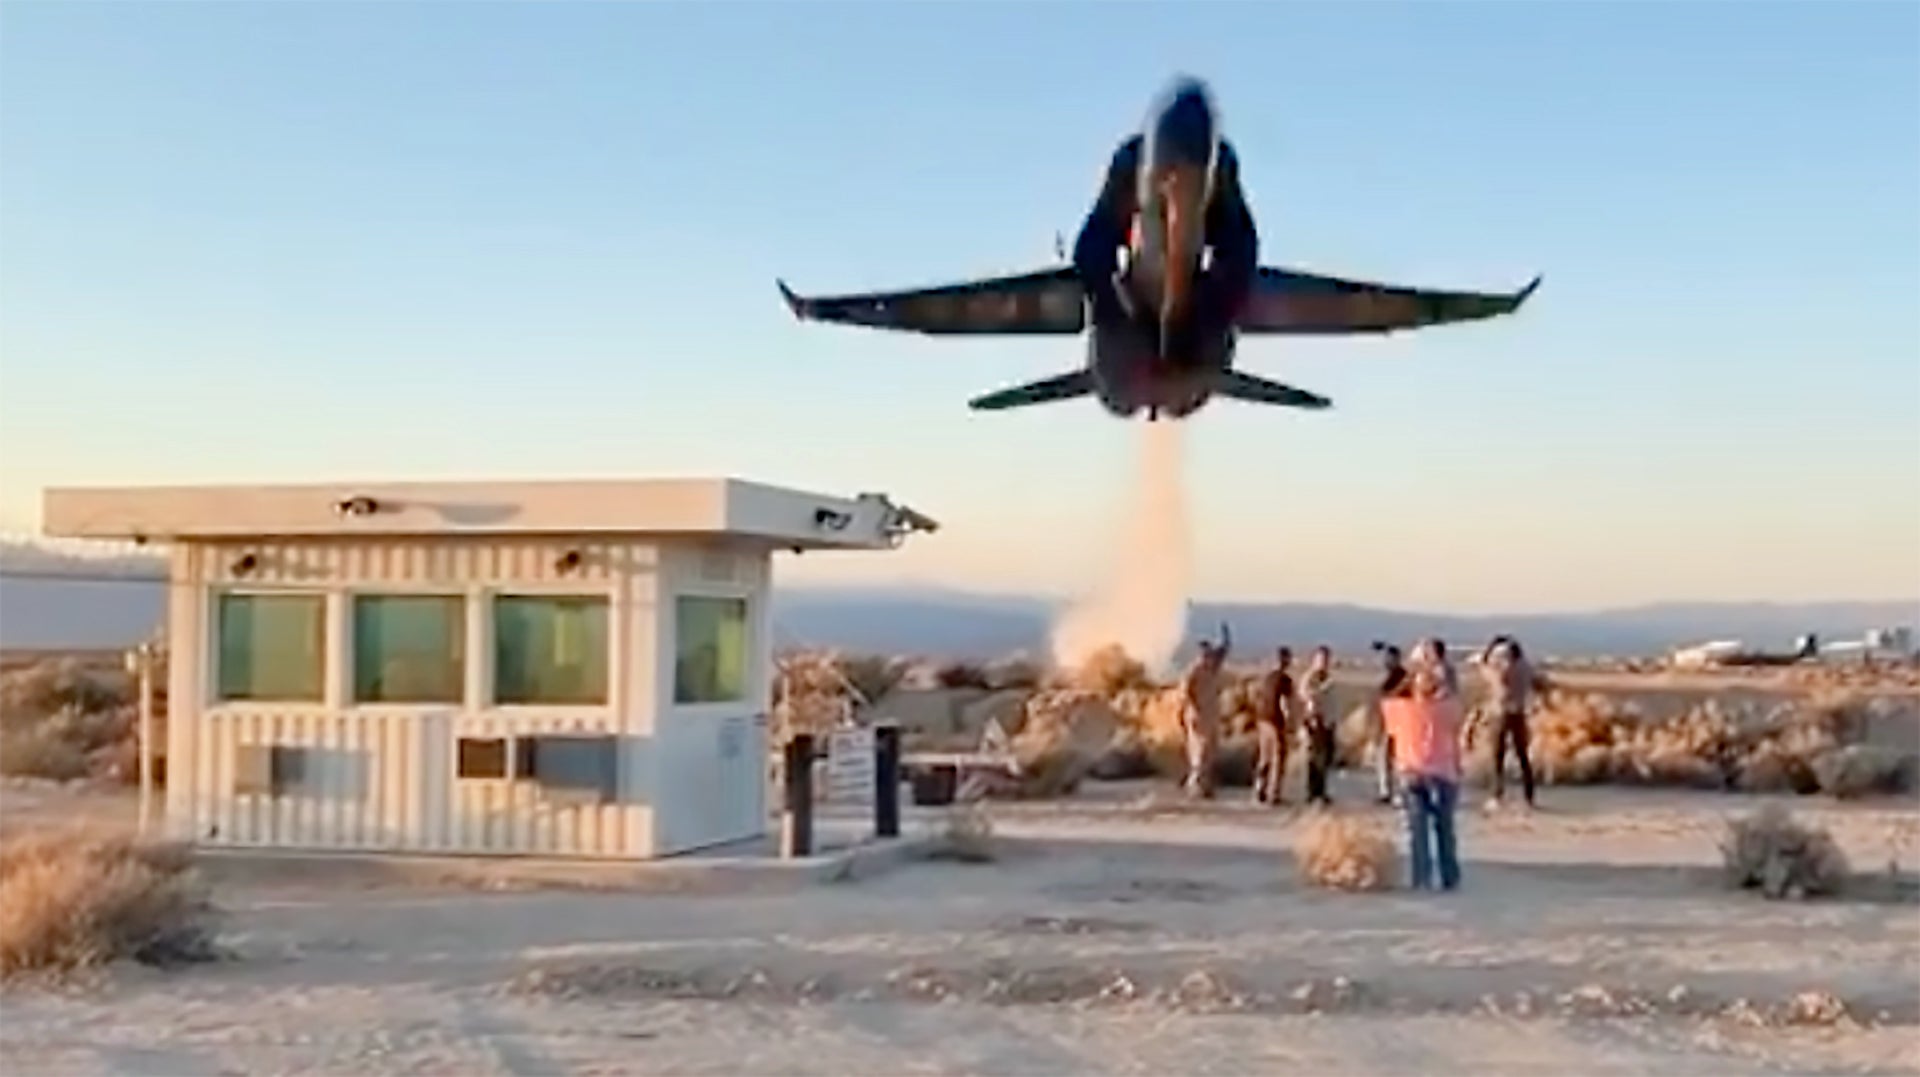 This Blue Angel Flyby Is How Top Gun 2 Captured That Crazy Hypersonic Jet Scene